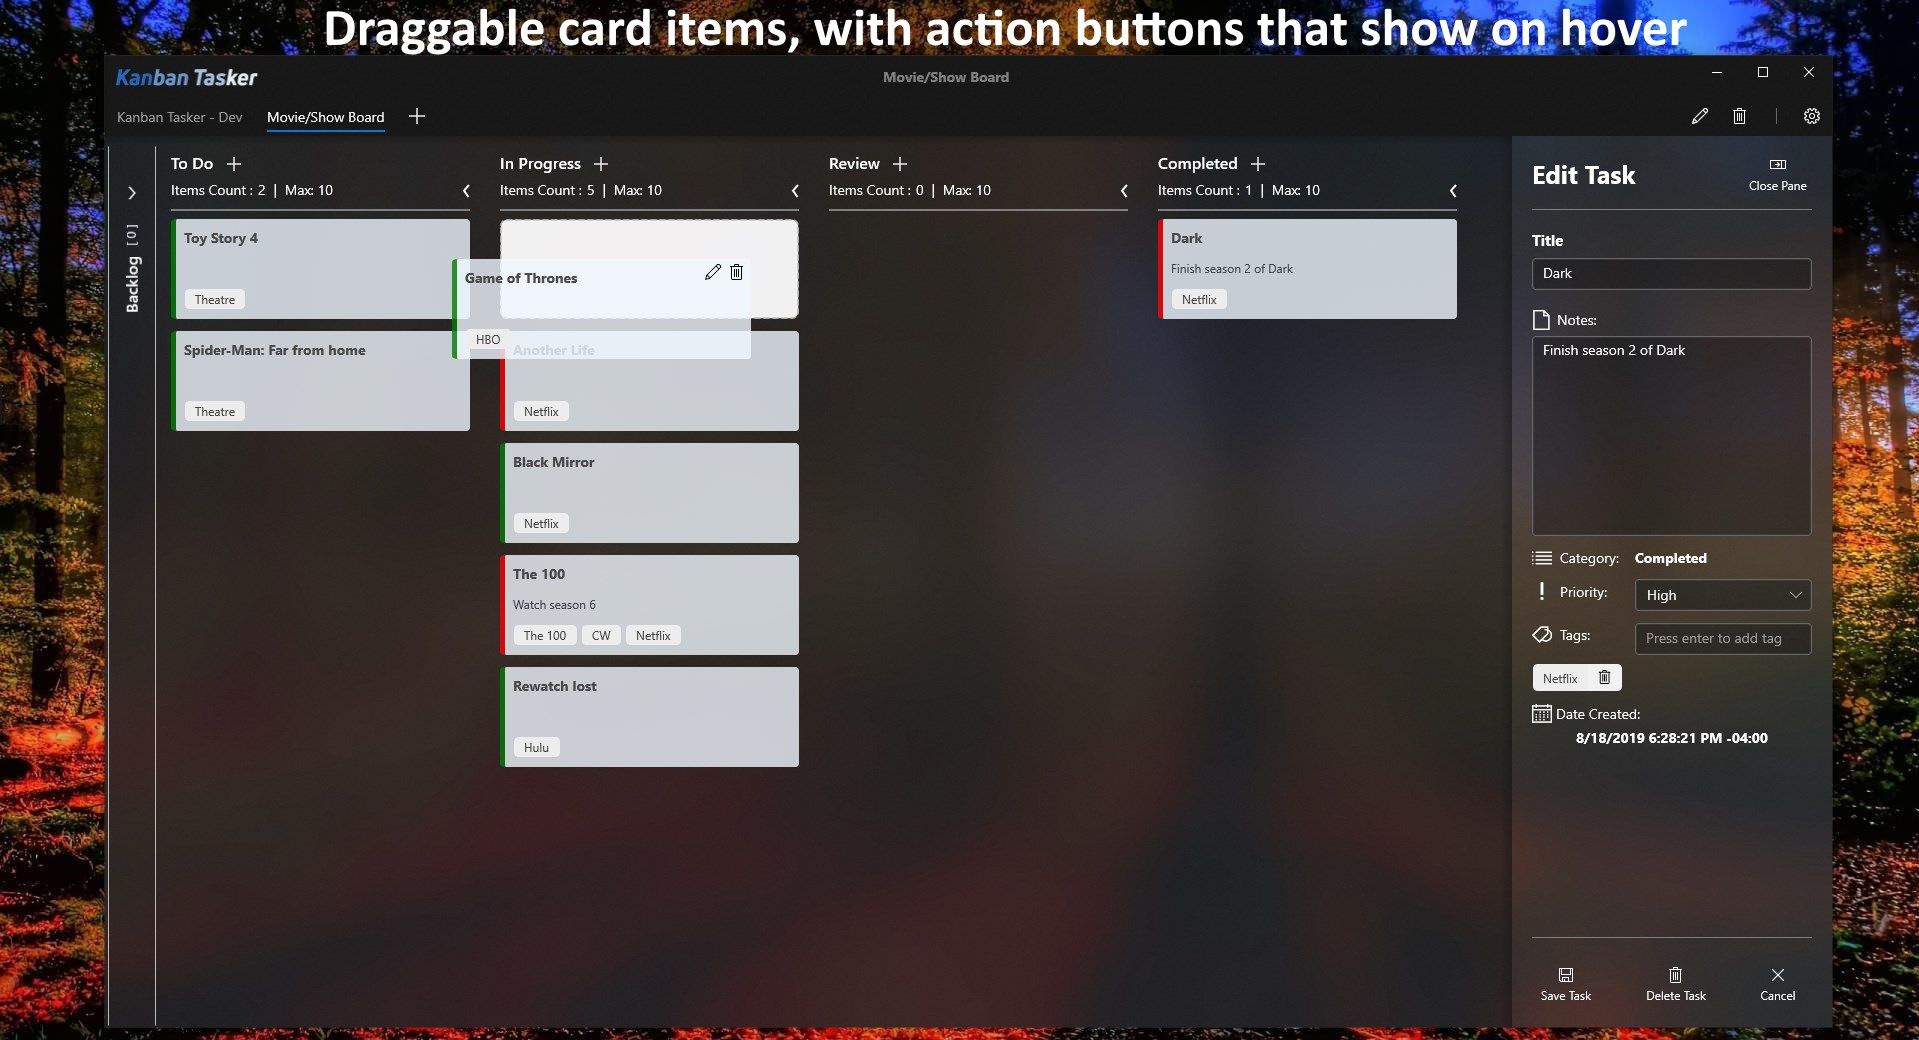 Draggable card items, with action buttons that show on hover over a card